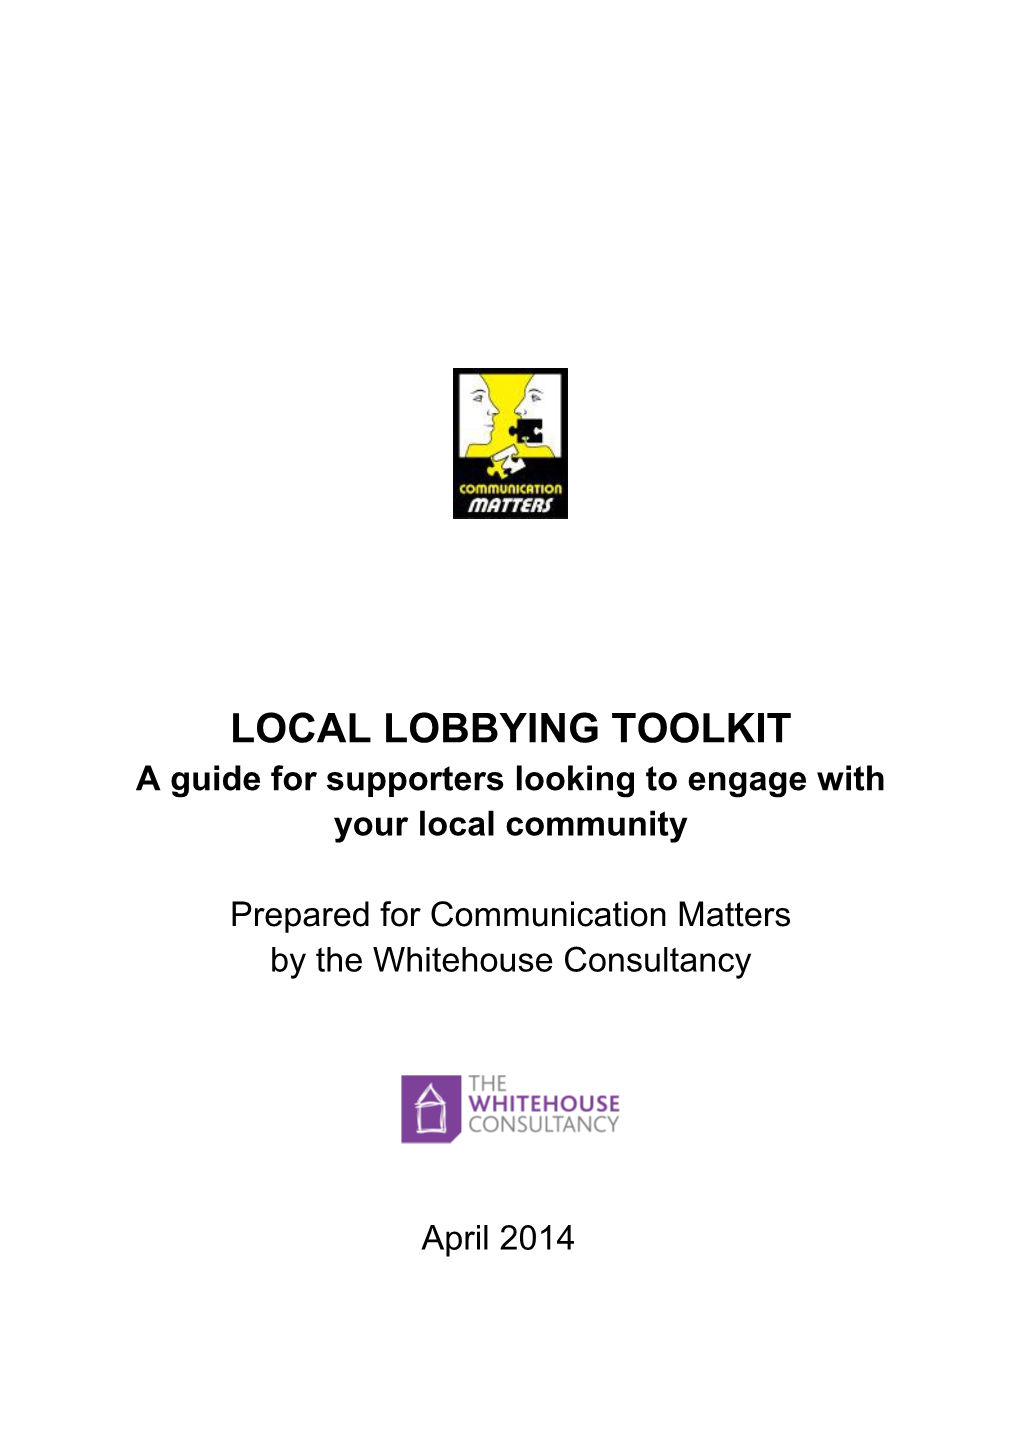 A Guide for Supporters Looking to Engage with Your Local Community